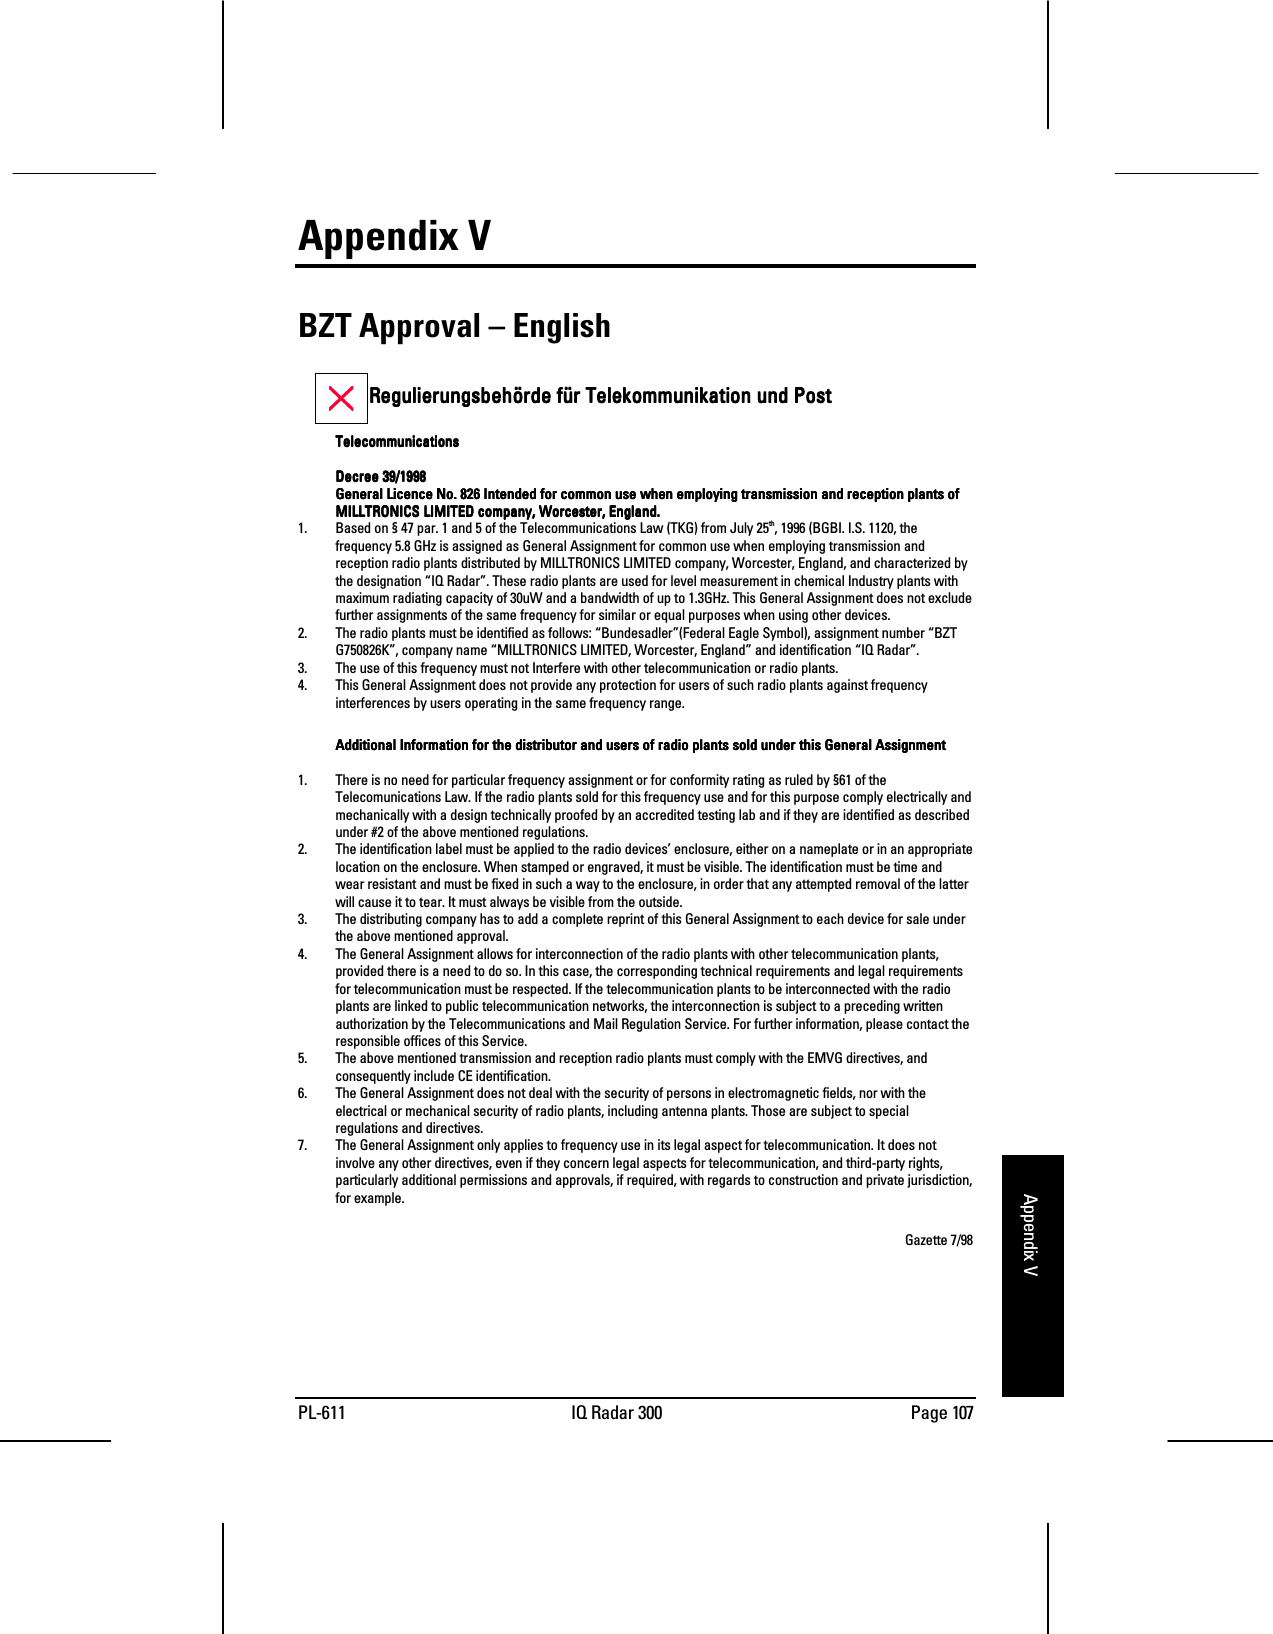 PL-611 IQ Radar 300 Page 107Appendix VAppendix VBZT Approval – English        Regulierungsbehörde für Telekommunikation und PostRegulierungsbehörde für Telekommunikation und PostRegulierungsbehörde für Telekommunikation und PostRegulierungsbehörde für Telekommunikation und PostTelecommunicationsTelecommunicationsTelecommunicationsTelecommunicationsDecree 39/1998Decree 39/1998Decree 39/1998Decree 39/1998General Licence No. 826 Intended for common use when employing transmission and reception plants ofGeneral Licence No. 826 Intended for common use when employing transmission and reception plants ofGeneral Licence No. 826 Intended for common use when employing transmission and reception plants ofGeneral Licence No. 826 Intended for common use when employing transmission and reception plants ofMILLTRONICS LIMITED company, Worcester, England.MILLTRONICS LIMITED company, Worcester, England.MILLTRONICS LIMITED company, Worcester, England.MILLTRONICS LIMITED company, Worcester, England.1. Based on § 47 par. 1 and 5 of the Telecommunications Law (TKG) from July 25th, 1996 (BGBI. I.S. 1120, thefrequency 5.8 GHz is assigned as General Assignment for common use when employing transmission andreception radio plants distributed by MILLTRONICS LIMITED company, Worcester, England, and characterized bythe designation “IQ Radar”. These radio plants are used for level measurement in chemical Industry plants withmaximum radiating capacity of 30uW and a bandwidth of up to 1.3GHz. This General Assignment does not excludefurther assignments of the same frequency for similar or equal purposes when using other devices.2. The radio plants must be identified as follows: “Bundesadler”(Federal Eagle Symbol), assignment number “BZTG750826K”, company name “MILLTRONICS LIMITED, Worcester, England” and identification “IQ Radar”.3. The use of this frequency must not Interfere with other telecommunication or radio plants.4. This General Assignment does not provide any protection for users of such radio plants against frequencyinterferences by users operating in the same frequency range.Additional Information for the distributor and users of radio plants sold under this General AssignmentAdditional Information for the distributor and users of radio plants sold under this General AssignmentAdditional Information for the distributor and users of radio plants sold under this General AssignmentAdditional Information for the distributor and users of radio plants sold under this General Assignment1. There is no need for particular frequency assignment or for conformity rating as ruled by §61 of theTelecomunications Law. If the radio plants sold for this frequency use and for this purpose comply electrically andmechanically with a design technically proofed by an accredited testing lab and if they are identified as describedunder #2 of the above mentioned regulations.2. The identification label must be applied to the radio devices’ enclosure, either on a nameplate or in an appropriatelocation on the enclosure. When stamped or engraved, it must be visible. The identification must be time andwear resistant and must be fixed in such a way to the enclosure, in order that any attempted removal of the latterwill cause it to tear. It must always be visible from the outside.3. The distributing company has to add a complete reprint of this General Assignment to each device for sale underthe above mentioned approval.4. The General Assignment allows for interconnection of the radio plants with other telecommunication plants,provided there is a need to do so. In this case, the corresponding technical requirements and legal requirementsfor telecommunication must be respected. If the telecommunication plants to be interconnected with the radioplants are linked to public telecommunication networks, the interconnection is subject to a preceding writtenauthorization by the Telecommunications and Mail Regulation Service. For further information, please contact theresponsible offices of this Service.5. The above mentioned transmission and reception radio plants must comply with the EMVG directives, andconsequently include CE identification.6. The General Assignment does not deal with the security of persons in electromagnetic fields, nor with theelectrical or mechanical security of radio plants, including antenna plants. Those are subject to specialregulations and directives.7. The General Assignment only applies to frequency use in its legal aspect for telecommunication. It does notinvolve any other directives, even if they concern legal aspects for telecommunication, and third-party rights,particularly additional permissions and approvals, if required, with regards to construction and private jurisdiction,for example.Gazette 7/98